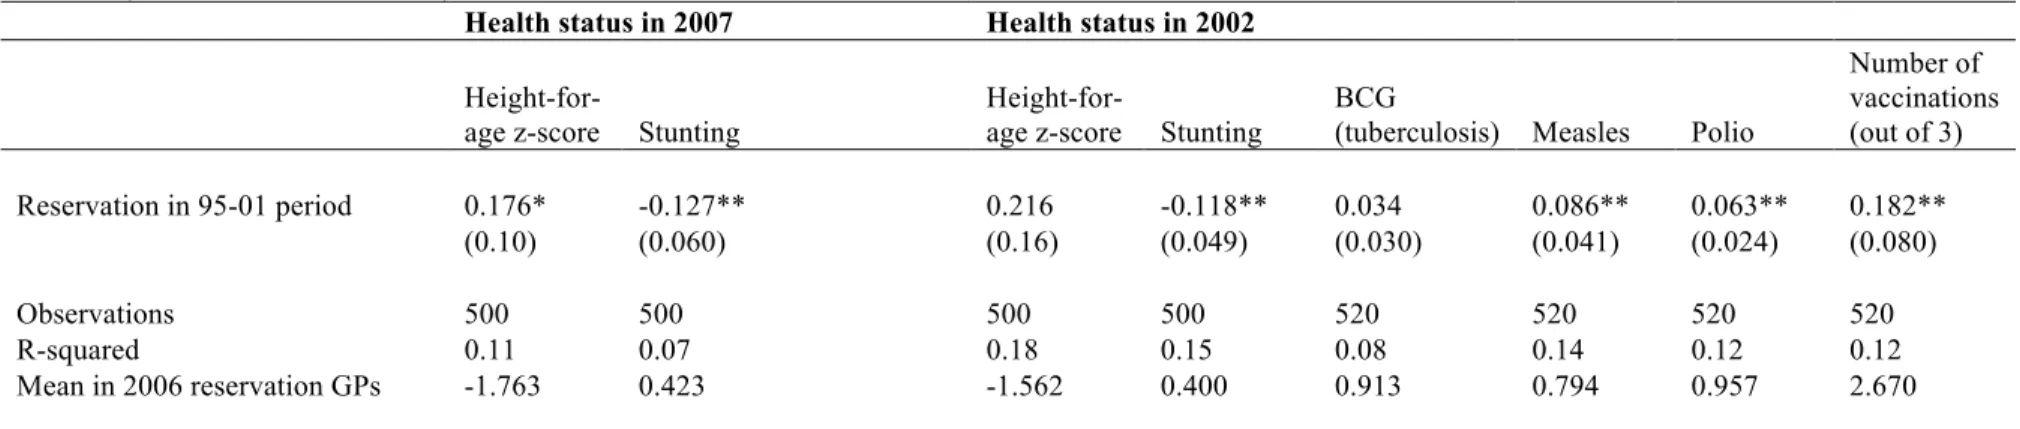 Table 5: Medium and short-term effects of 1995 reservation on nutritional and health status in 2007 and 2002: : children in utero during 95-01 reservation                (12-17 months in fall 2002) 